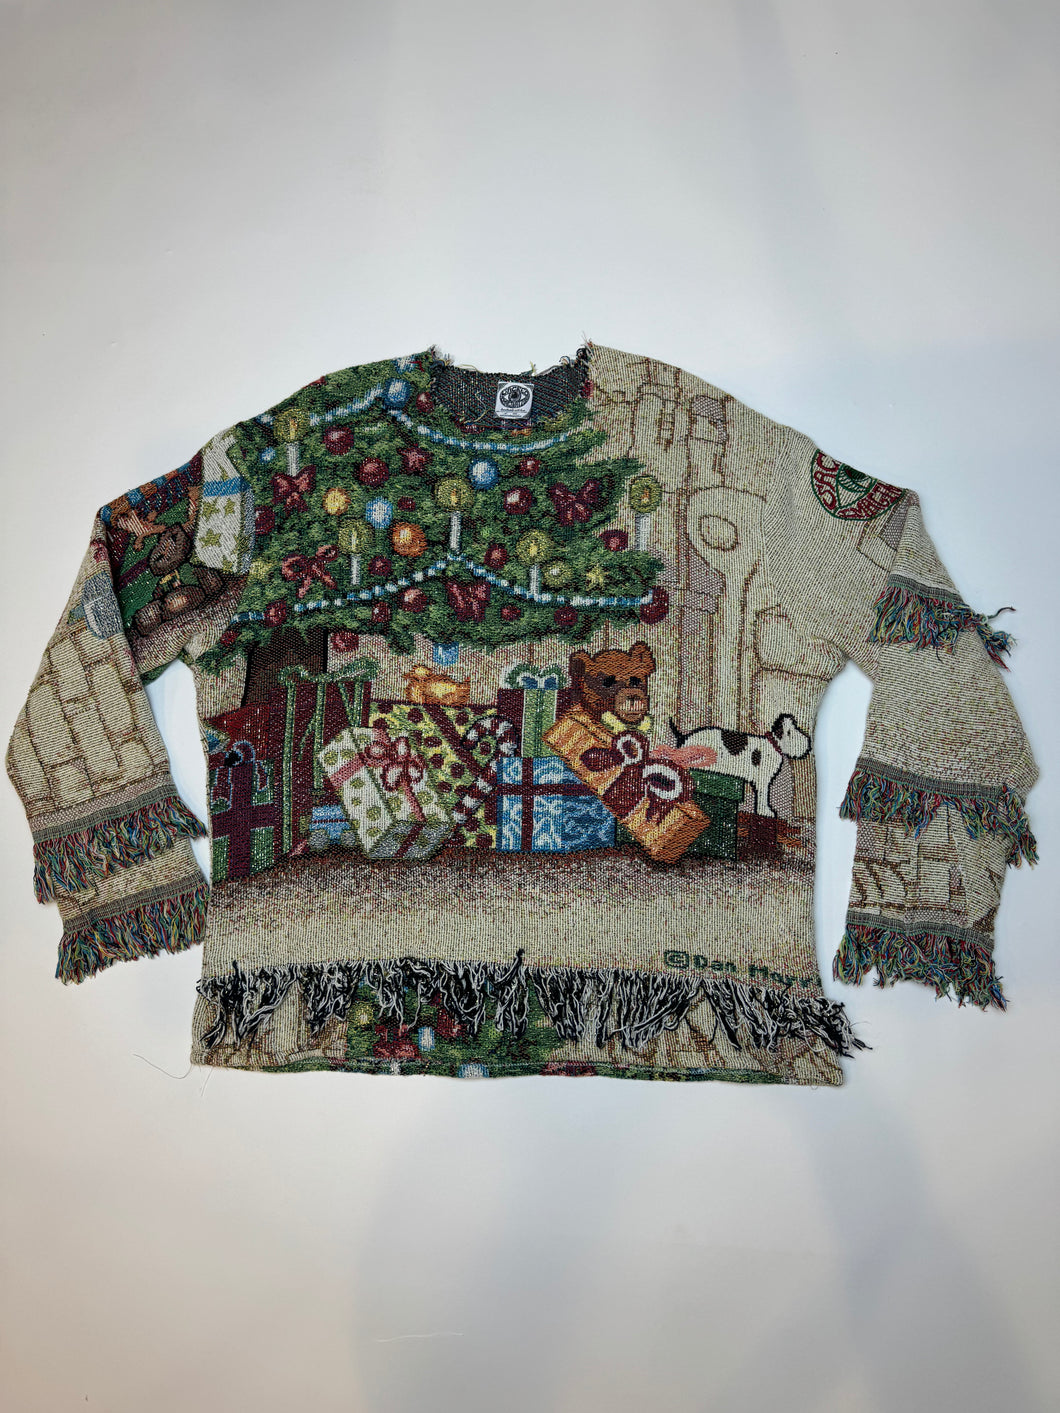 “Under the Tree” Blanket Sweater